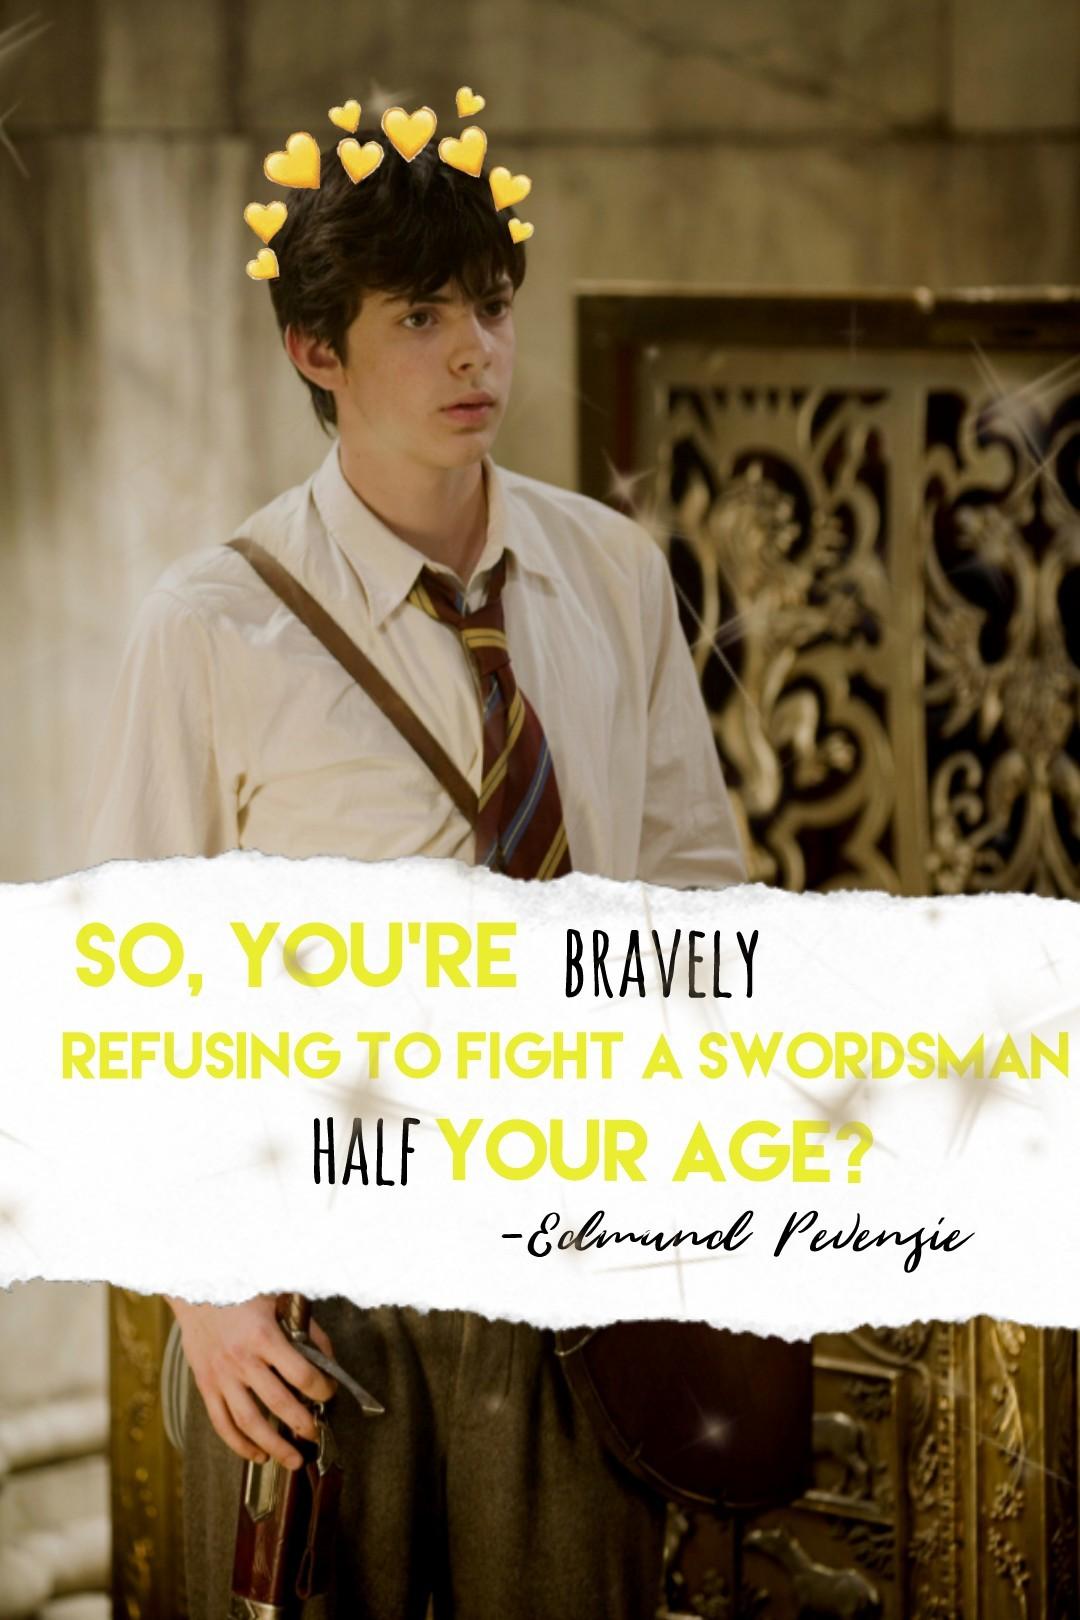 💛Tap💛

IM RUNNING OUT OF IDEAS HELP!!! TODAY IS EDMUND PEVENSIE FROM THE CHRONICLES OF NARNIA OK CYAA HELP ME PLS!